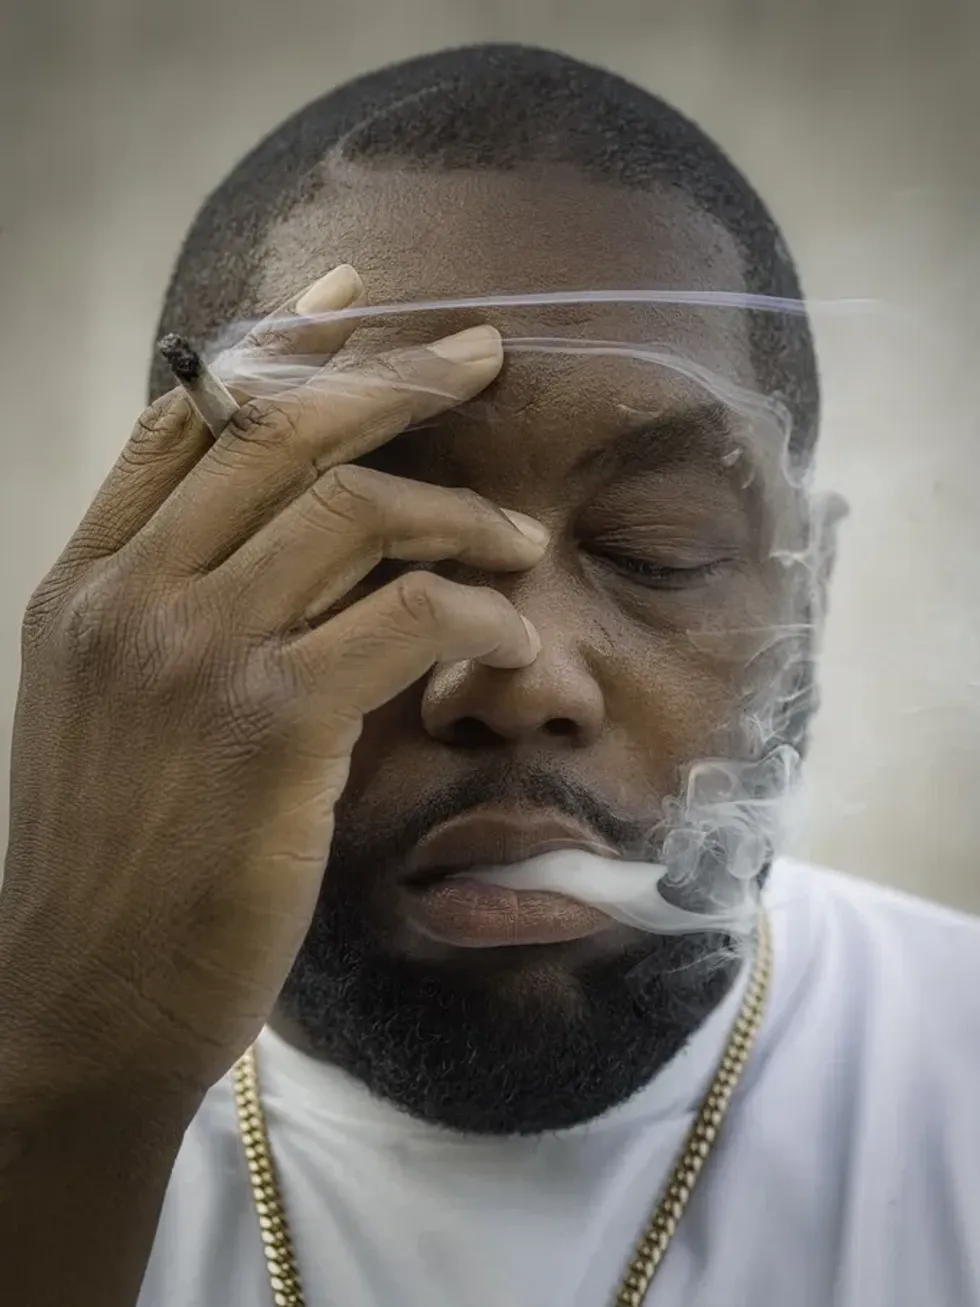 killer mike holding a blunt